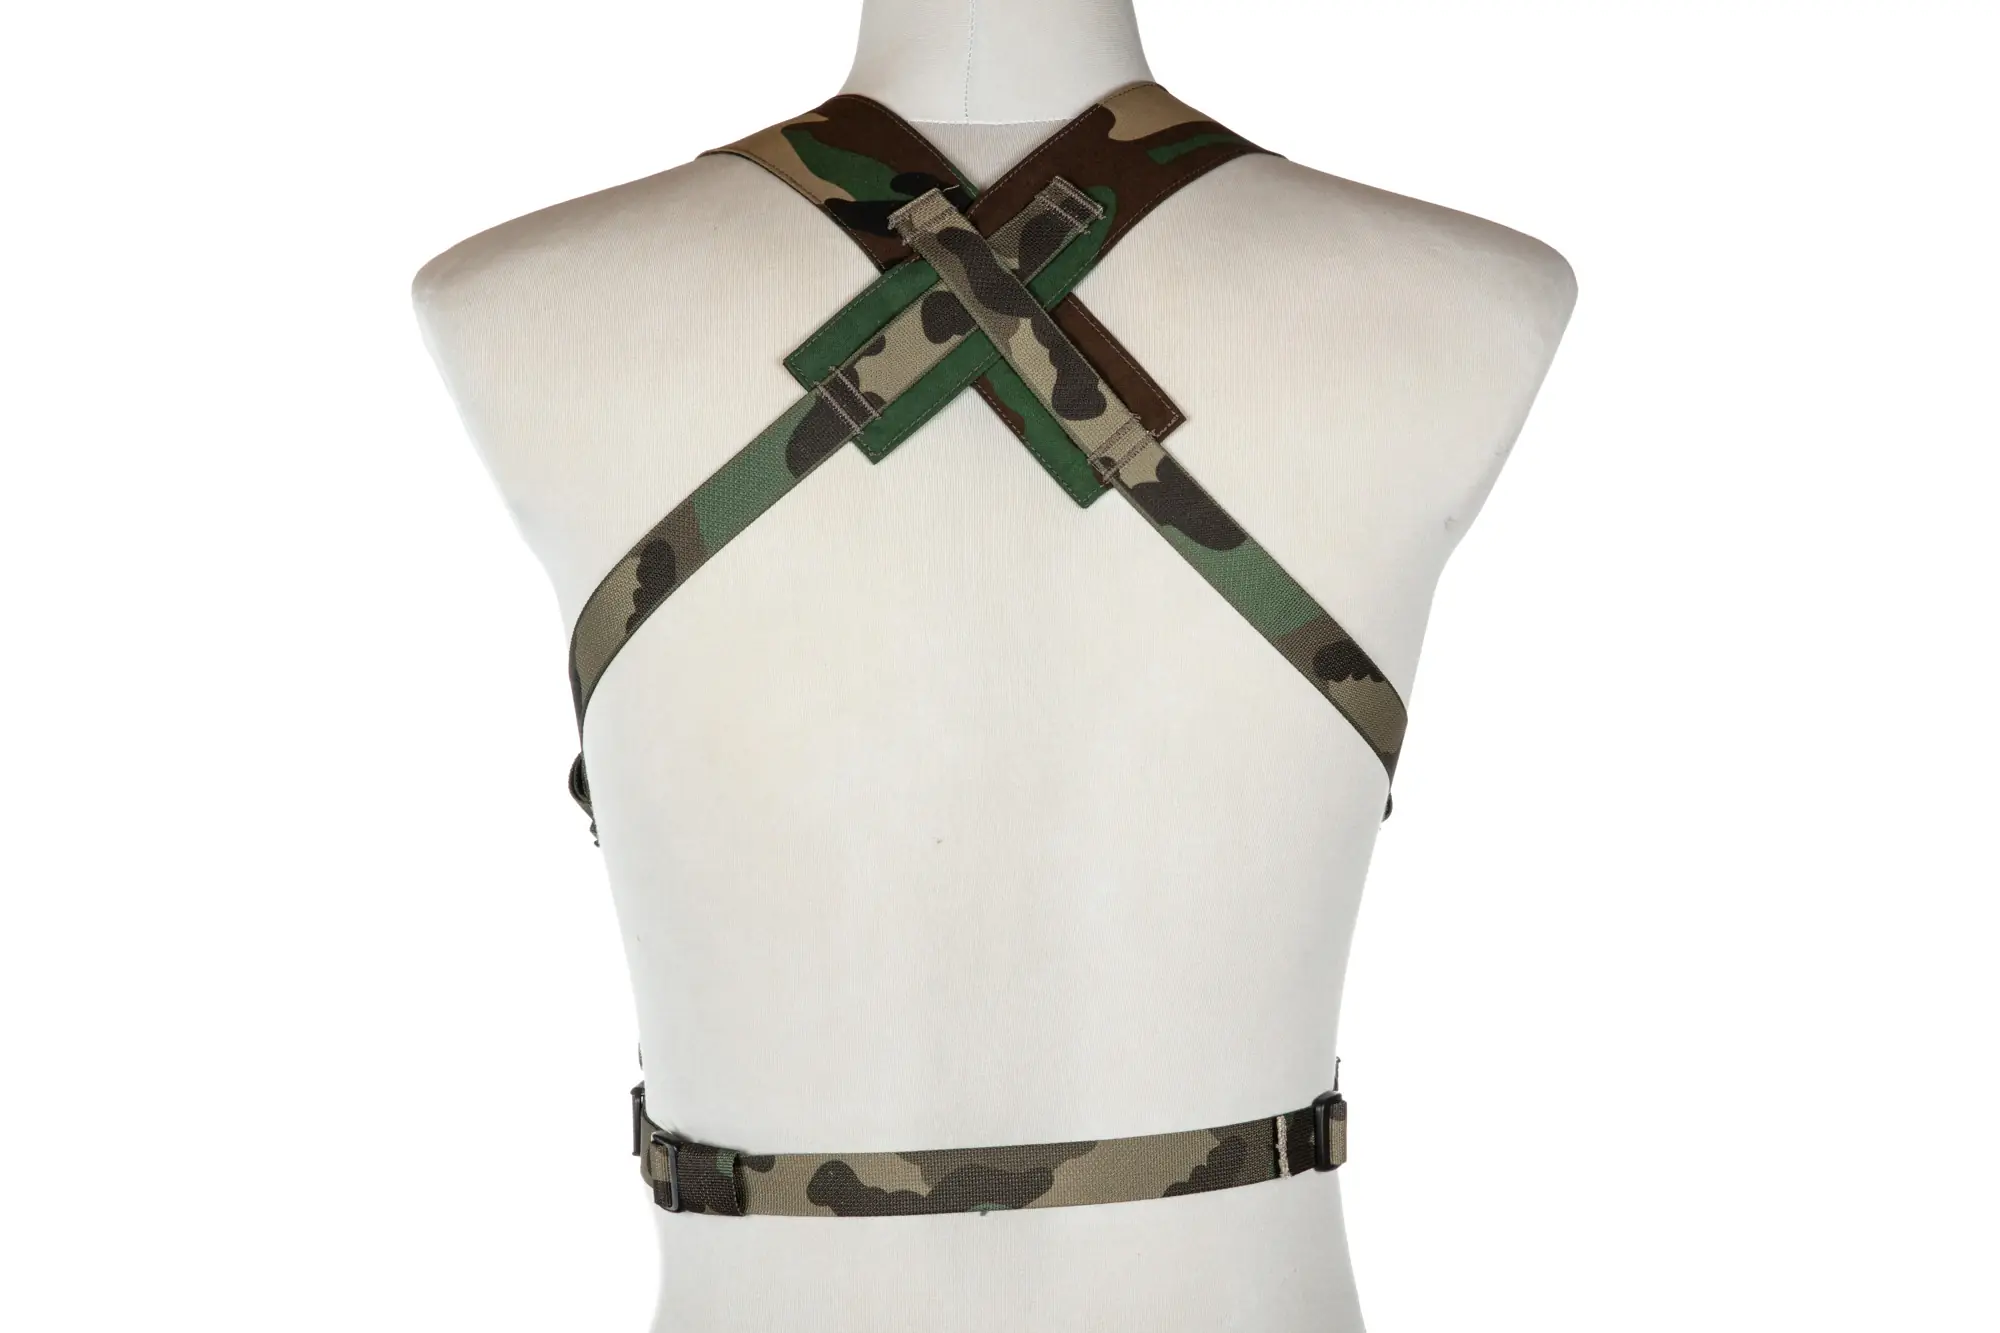 Tactical Chest Rig type D3CRM - Woodland